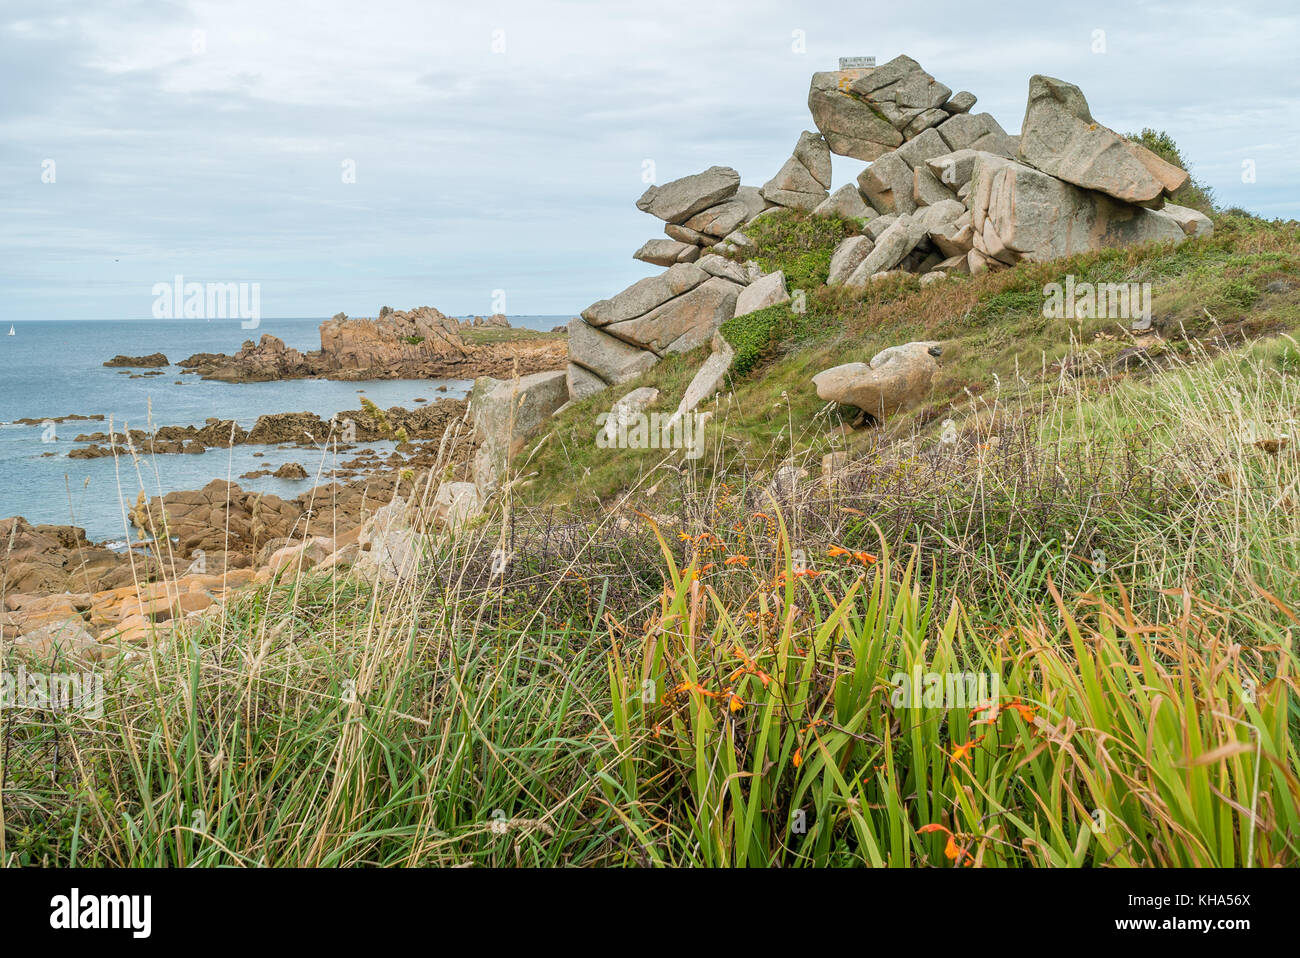 Chemin des douaniers in Primel, Brittany, France Stock Photo